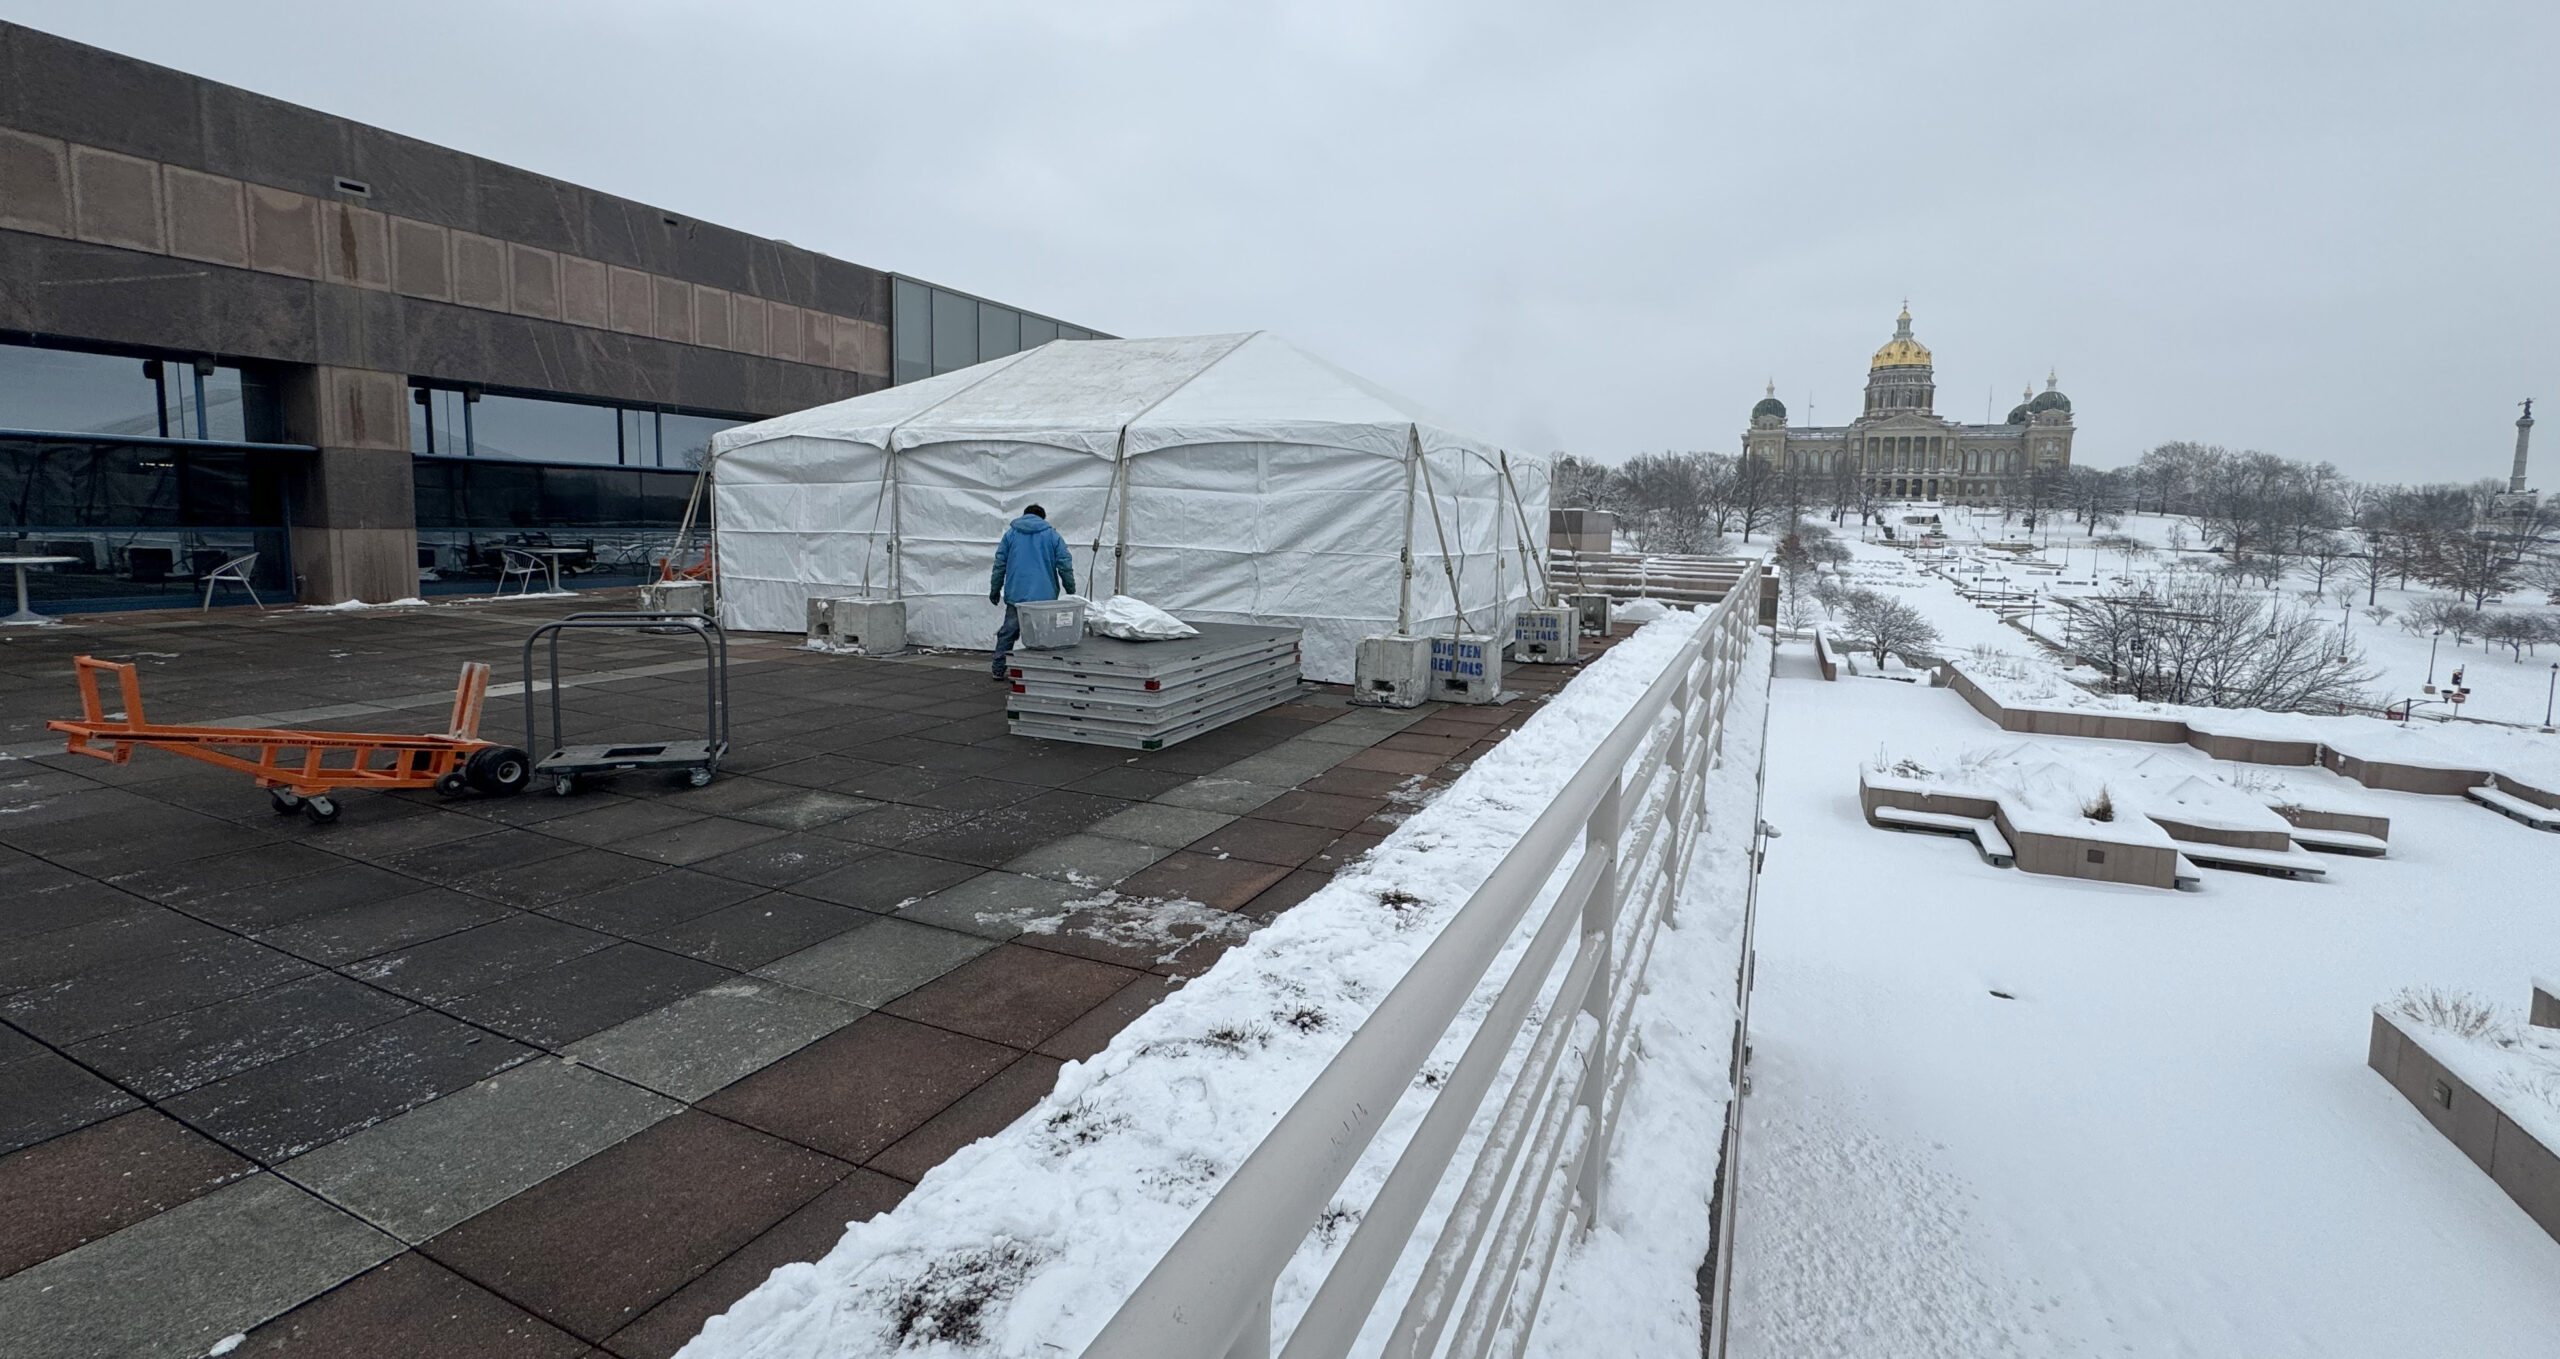 20' x 30' frame tent set up on the 3rd floor terrace of the State Historical Building in Des Moines, Iowa for NBC Universal News Group